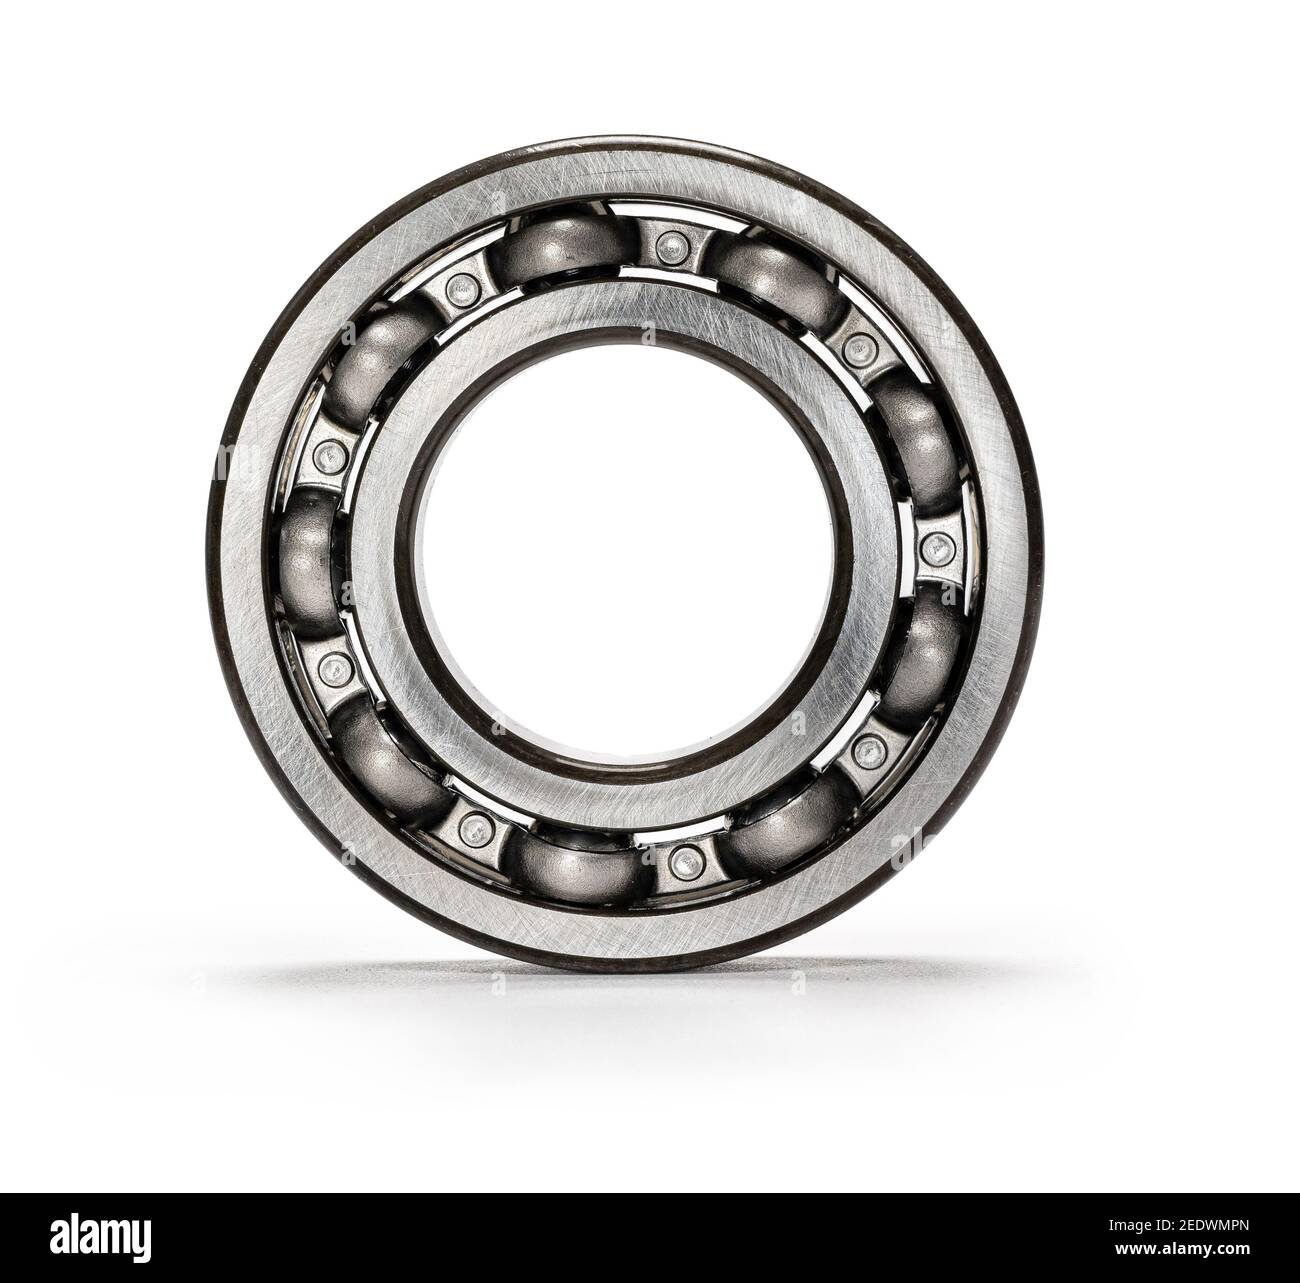 Rotating Circular Machine Part Cut Out Stock Images And Pictures Alamy 3546